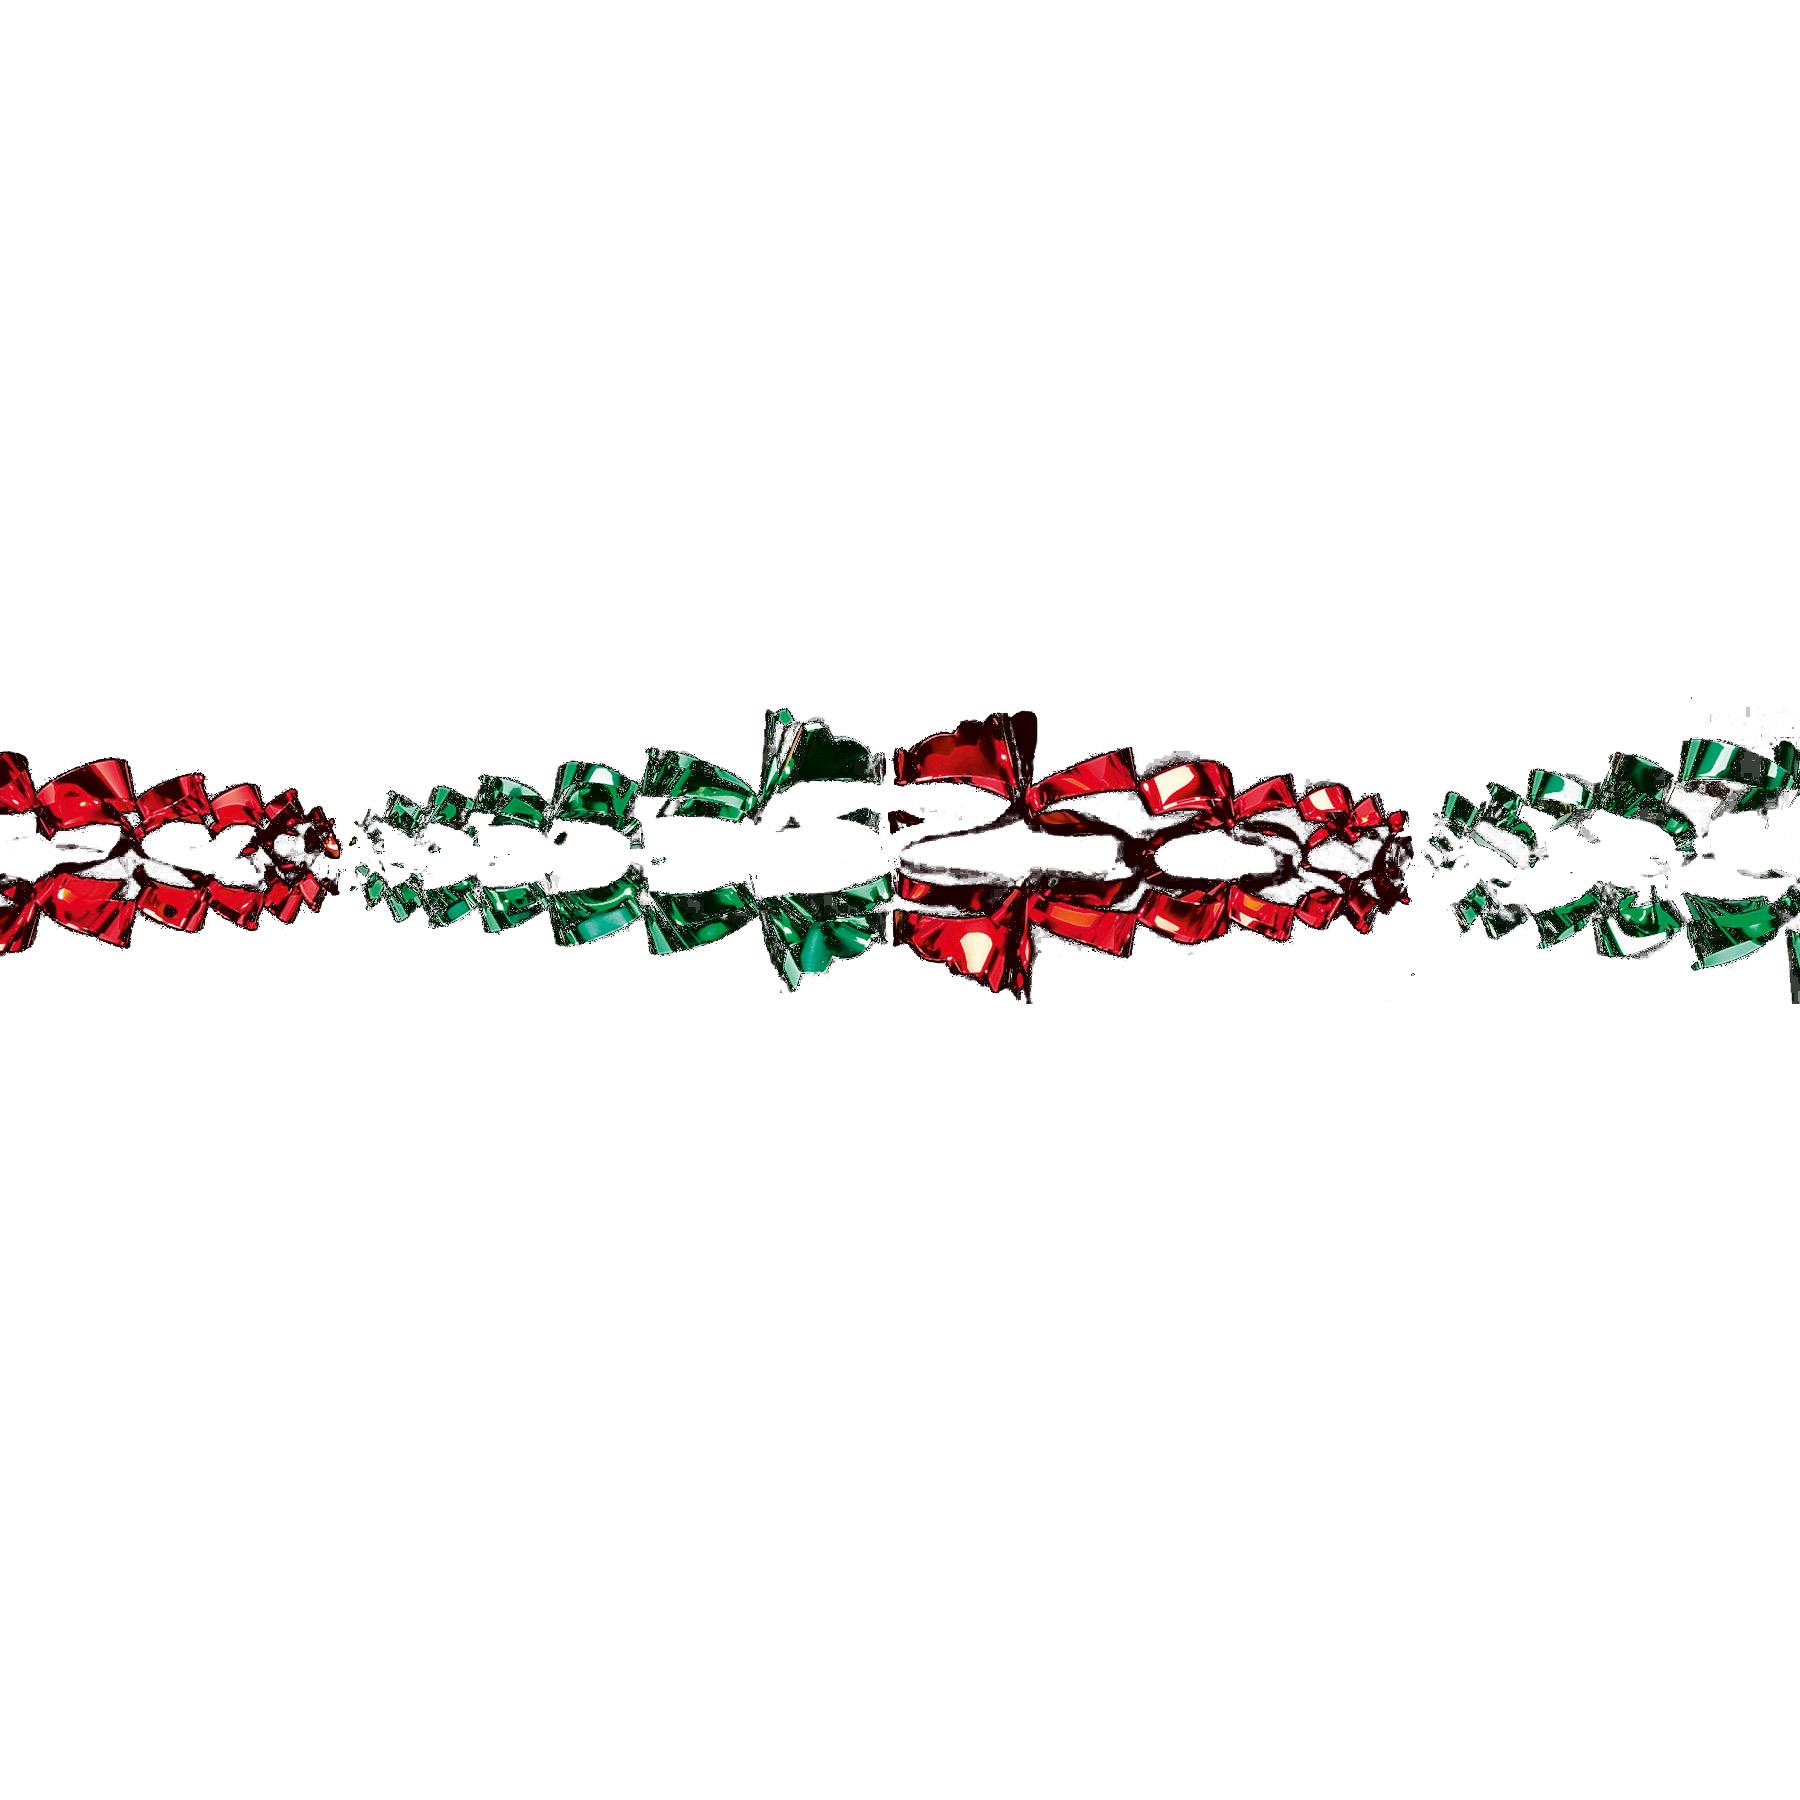 Green / Red Christmas 2 Tone Foil Ceiling Decorations - 15cm x 2.7M Garland